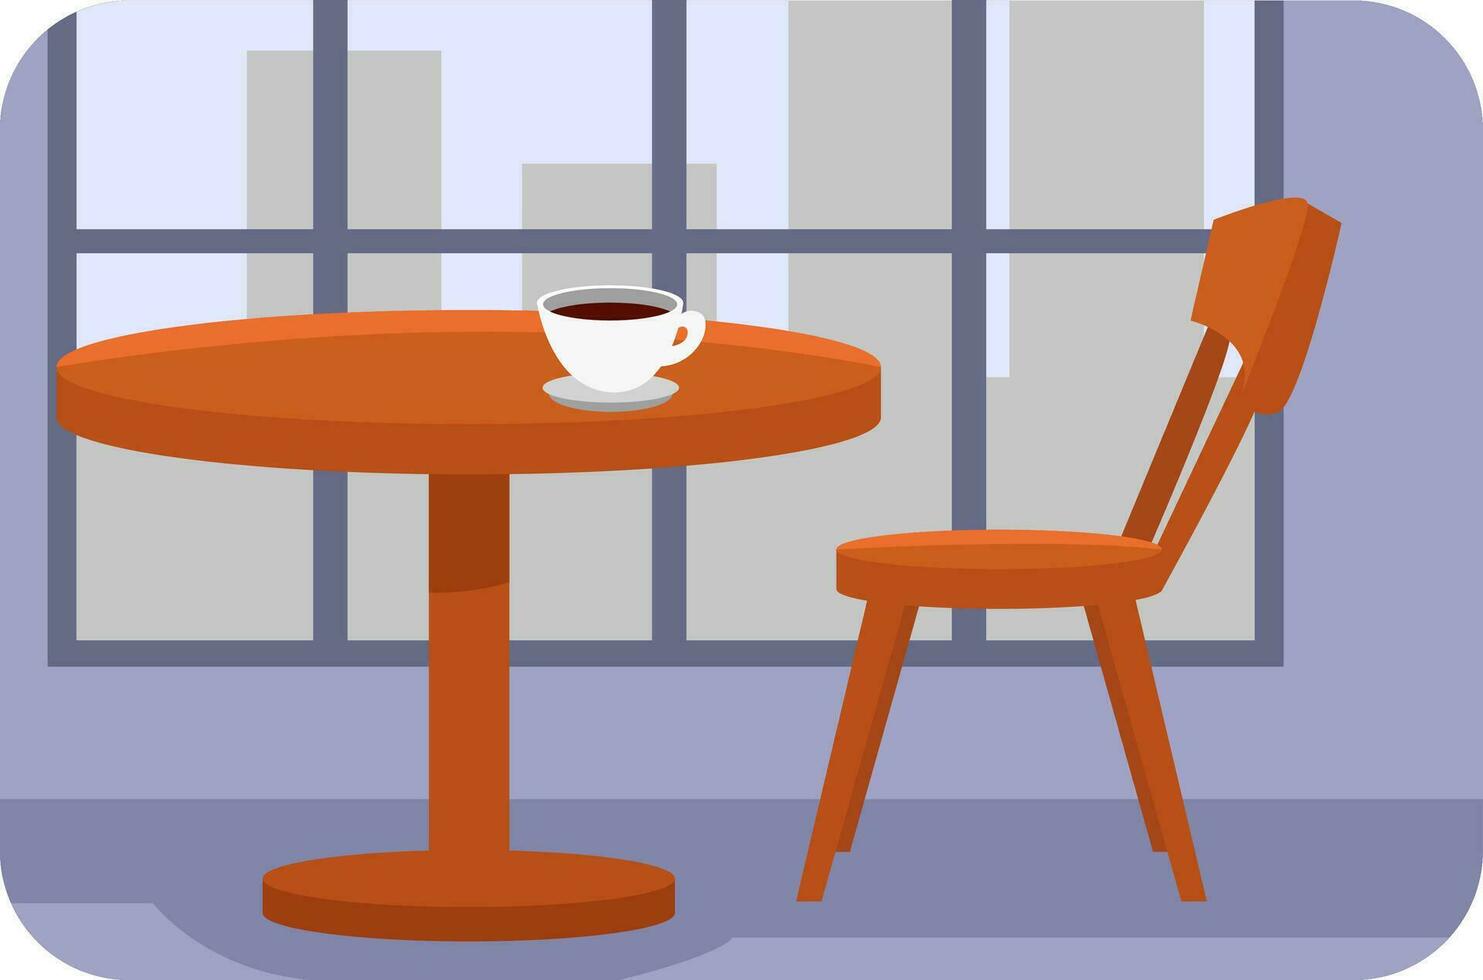 Cafe bar and stool, illustration, vector on a white background.